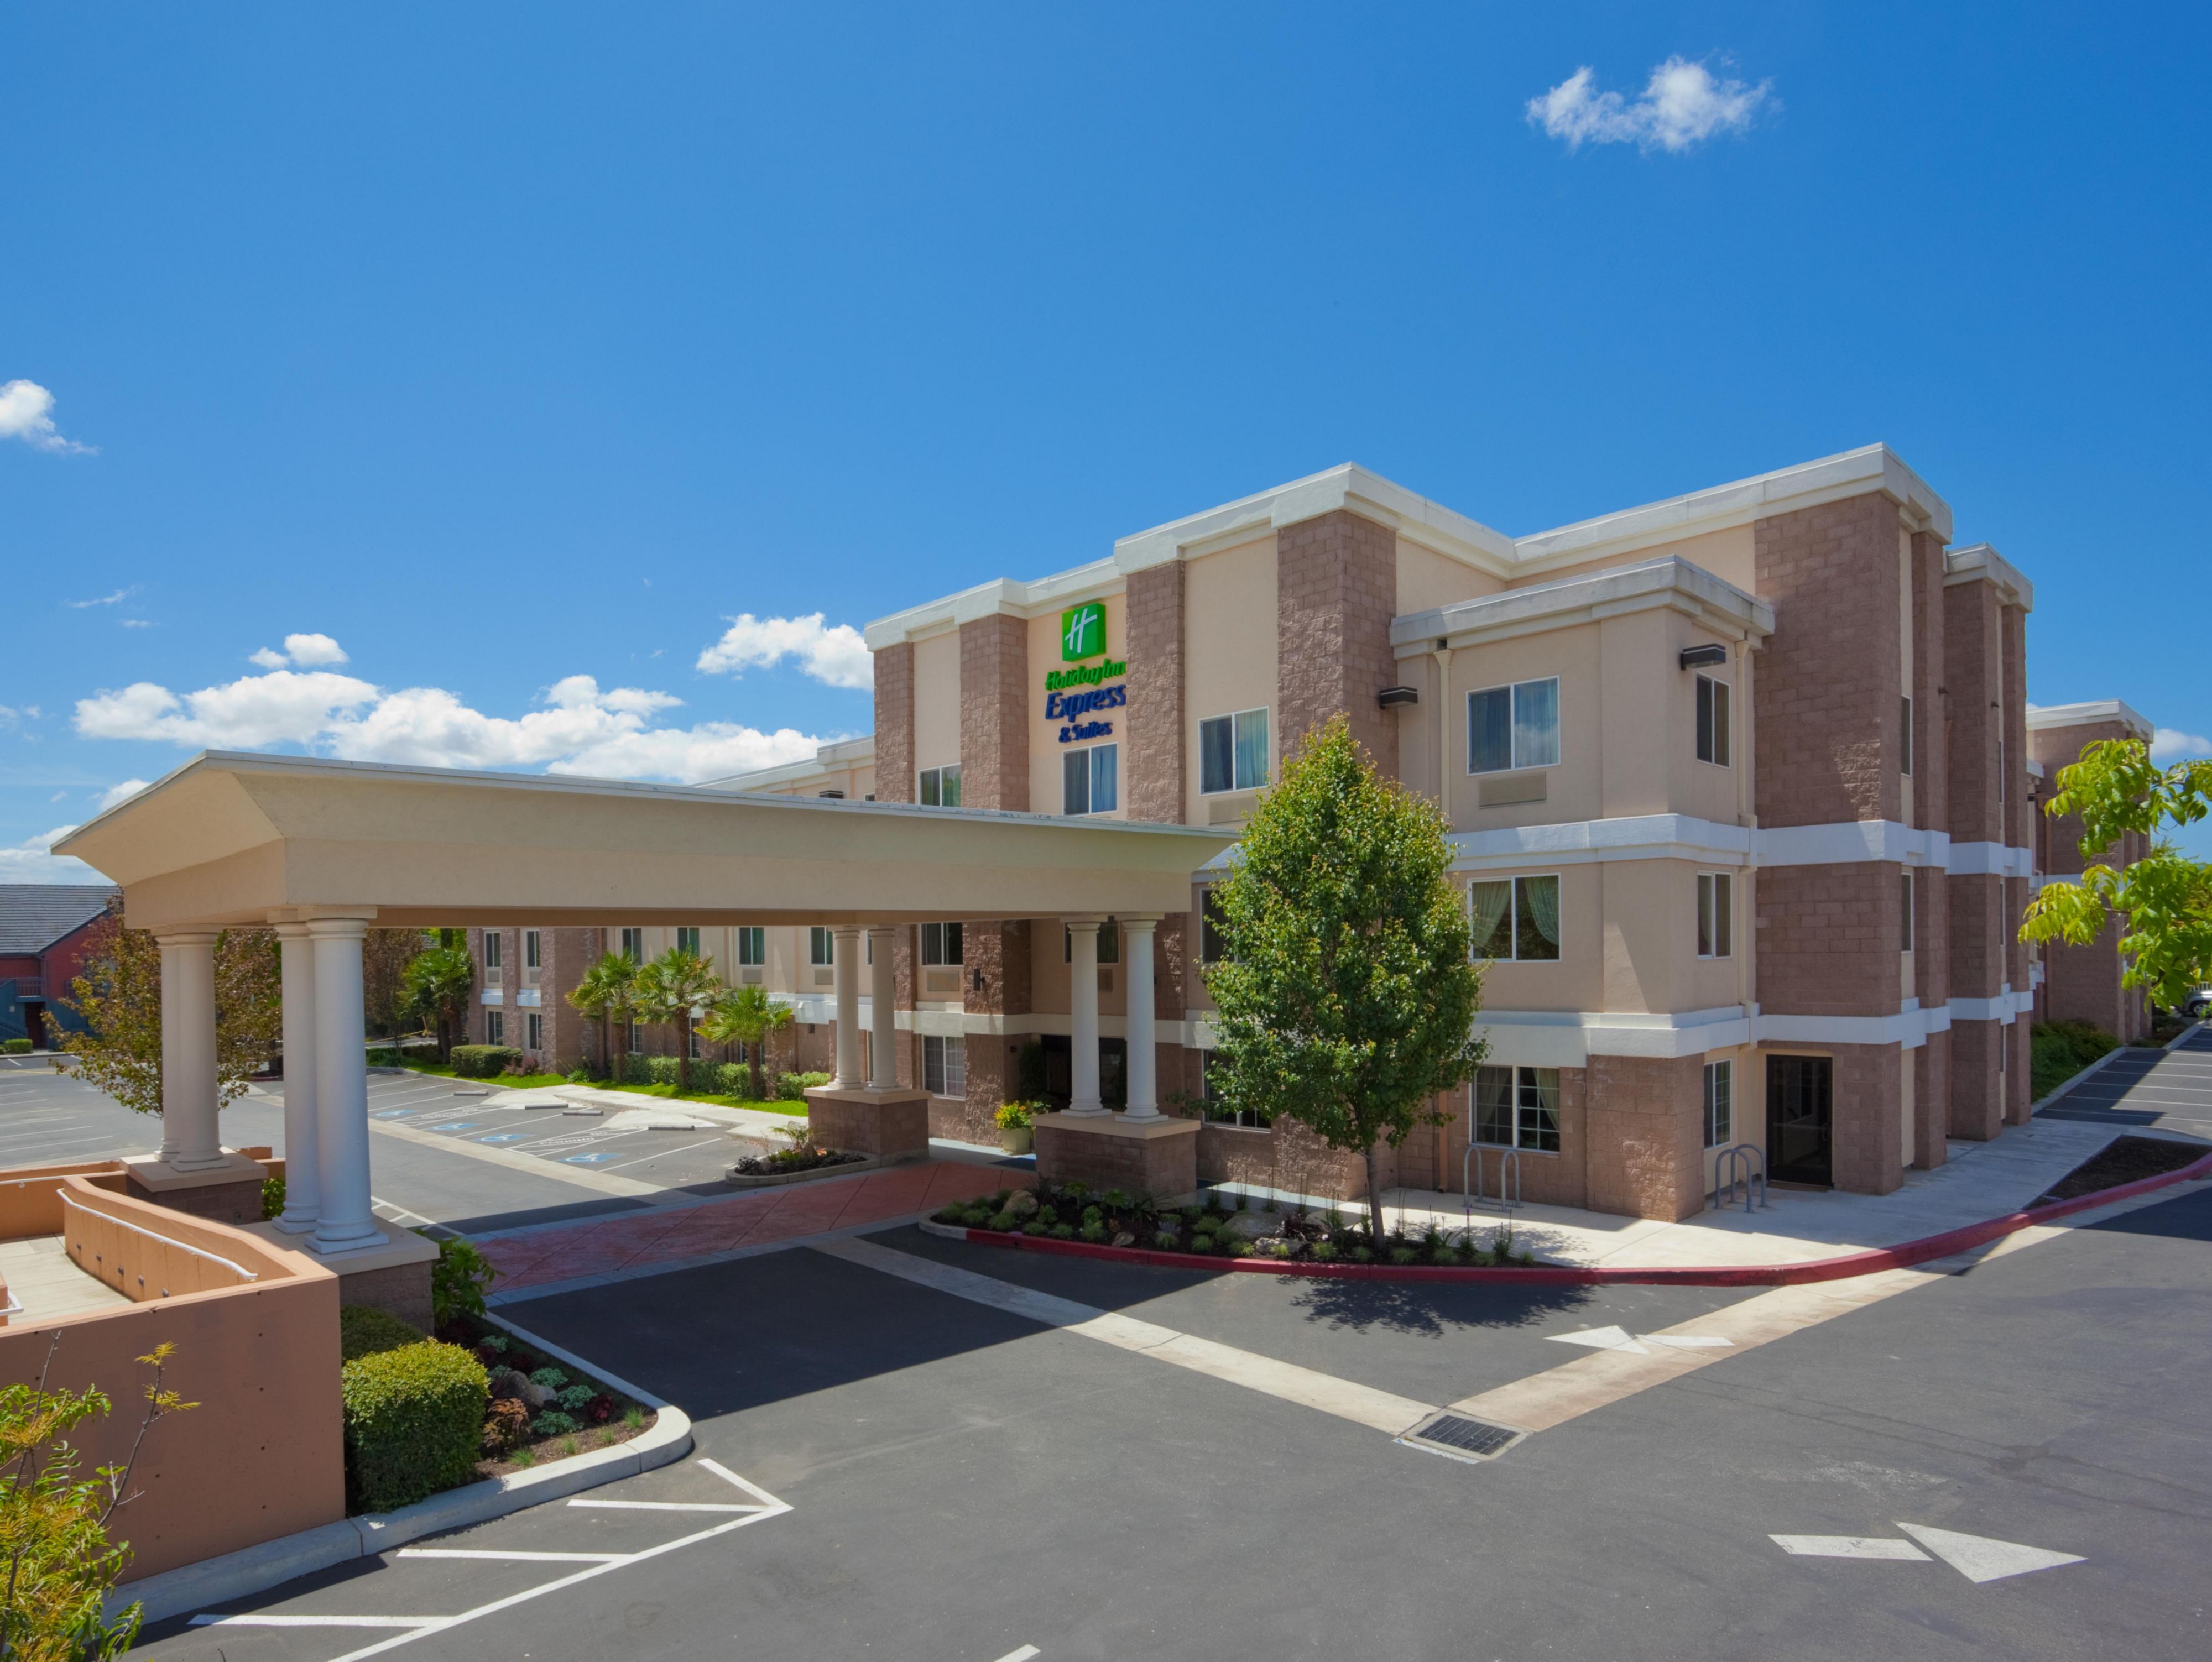 holiday inn express and suites livermore 4205728023 4x3